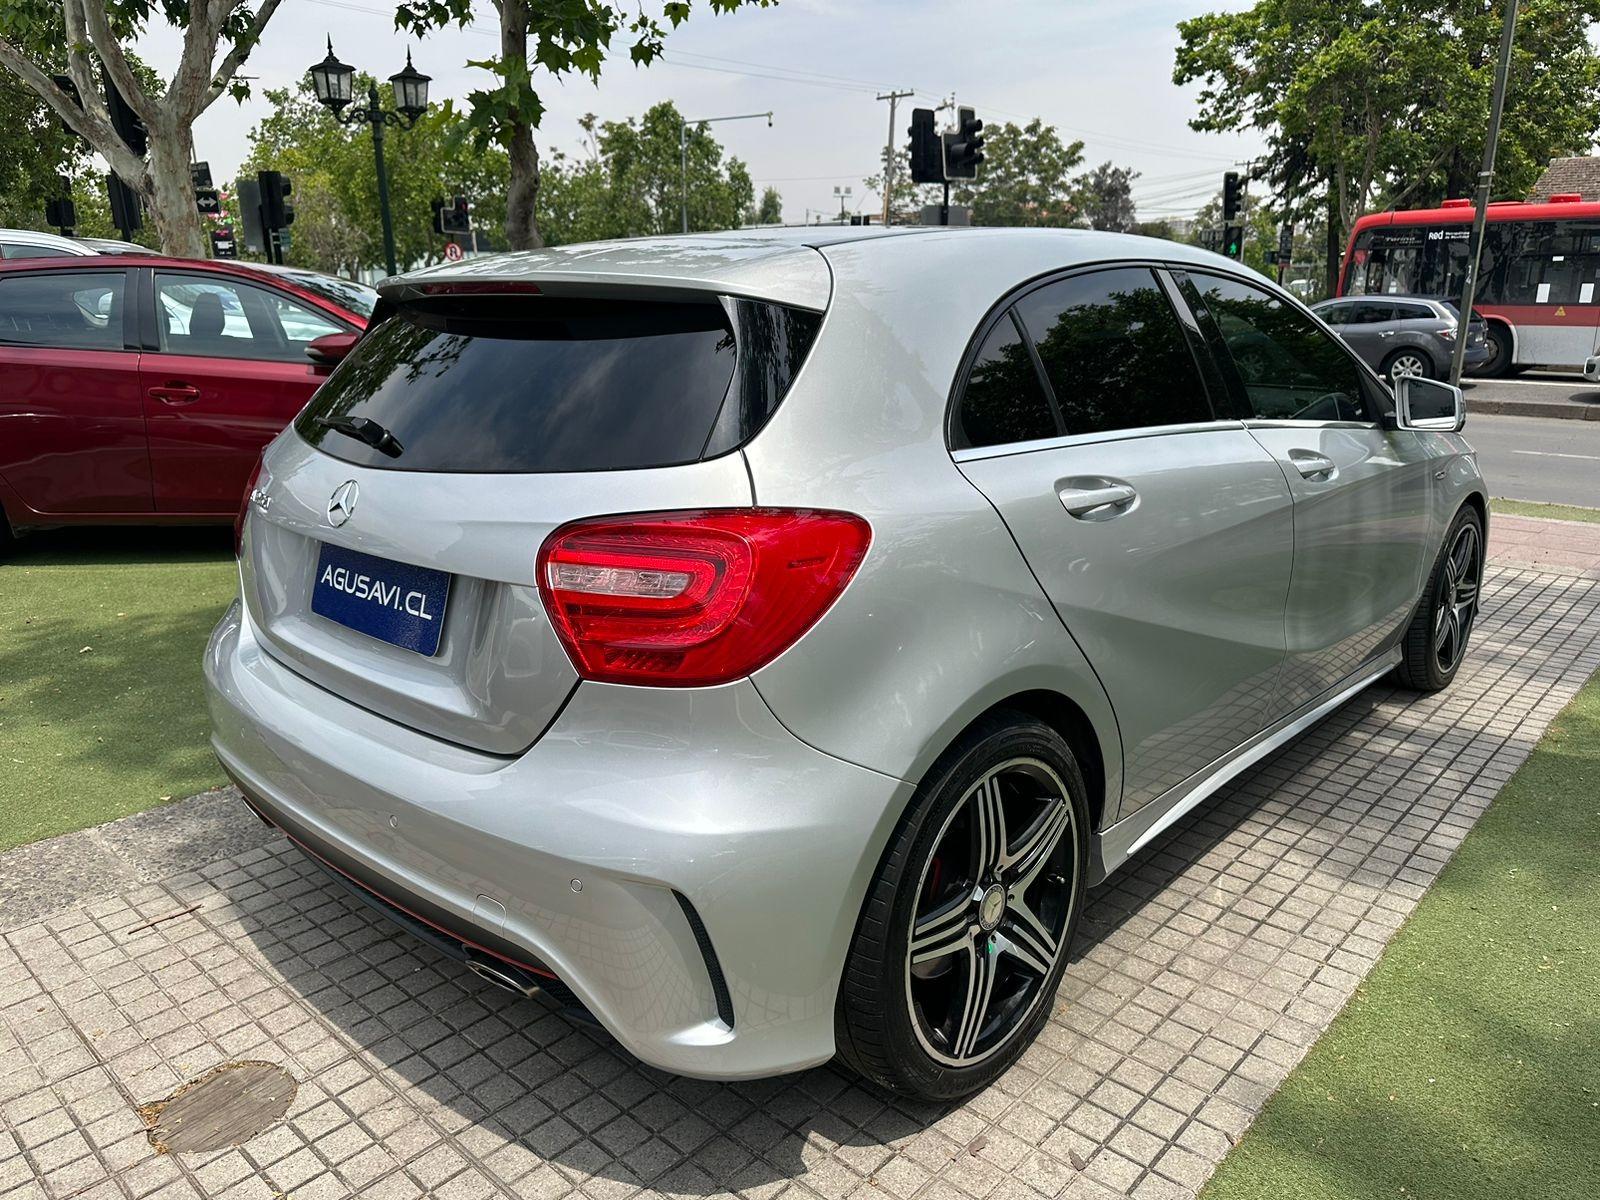 MERCEDES-BENZ A250 2.0 Sport DCT  2013 AUTOMATICO / SOLO 62.000 KM !! - FULL MOTOR